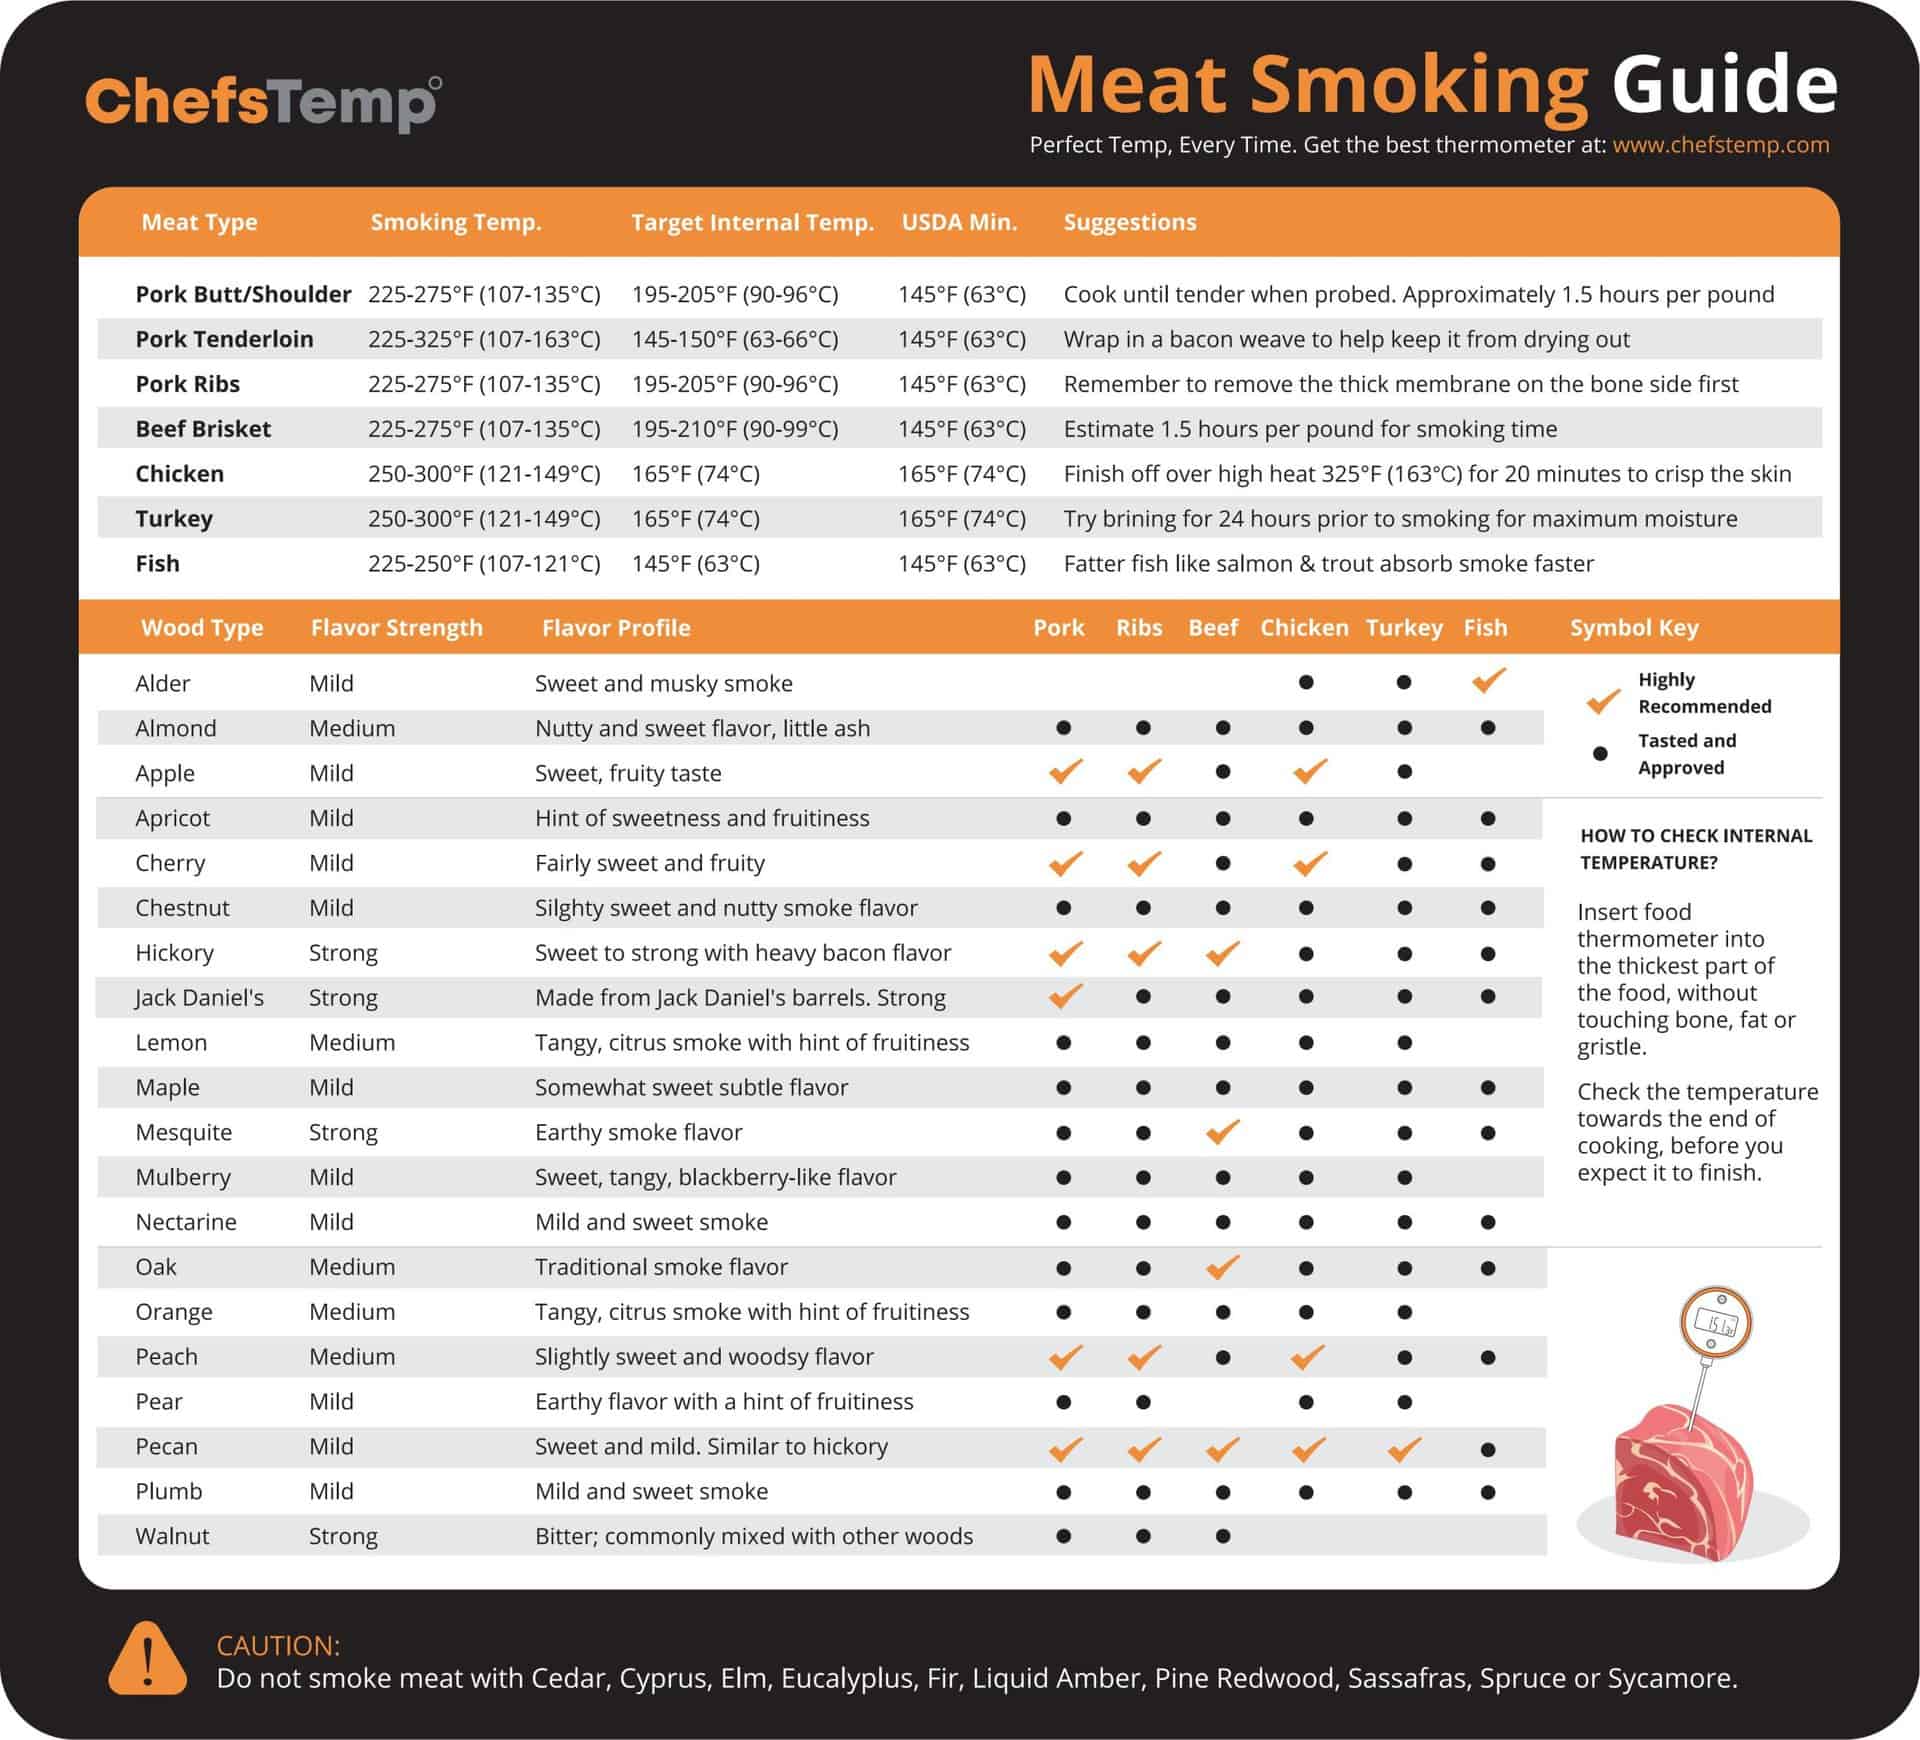 https://www.chefstemp.com/wp-content/uploads/2021/07/Meat-Smoking-Guide-scaled.jpg